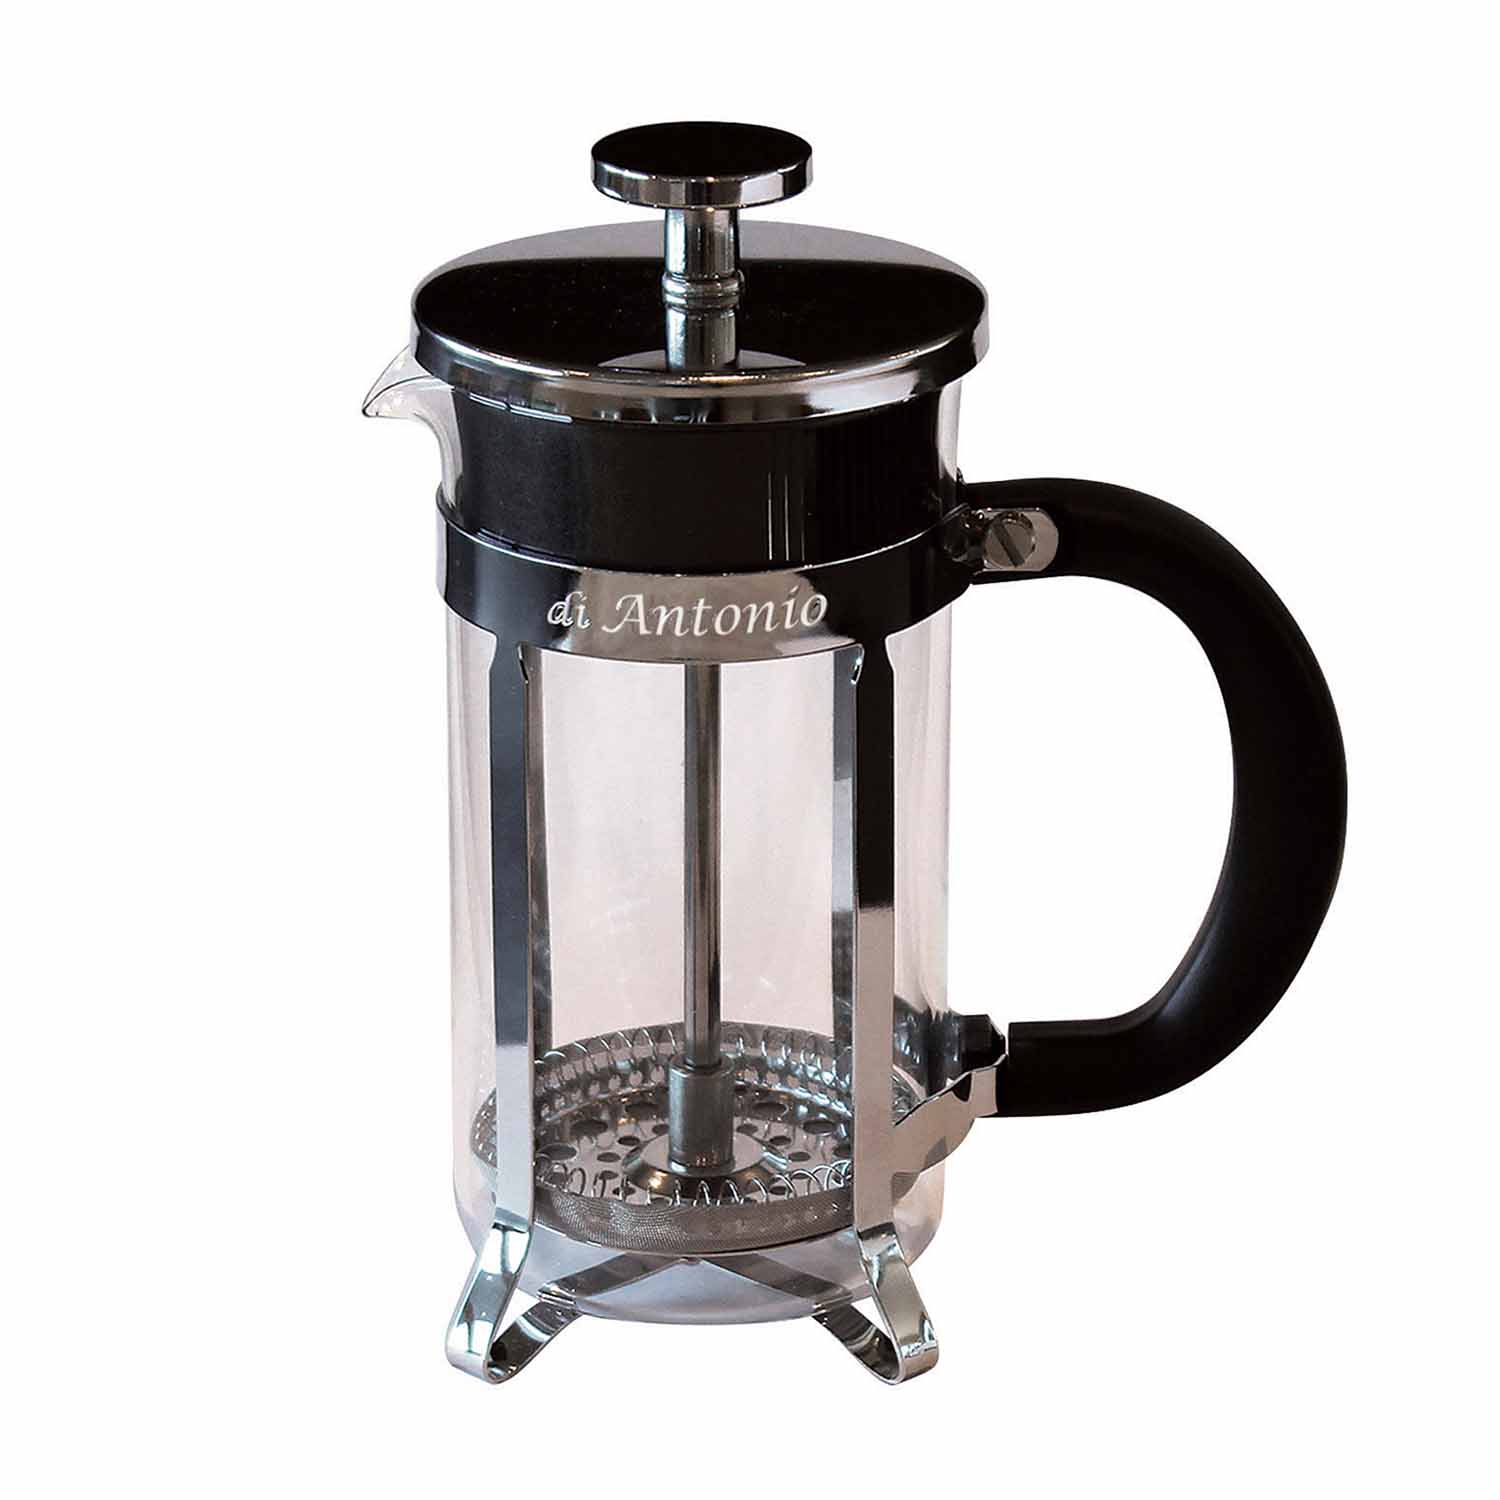 https://www.coffeeandtealovers.co.nz/site/file/product/3193/di-antonio-plunger.jpg